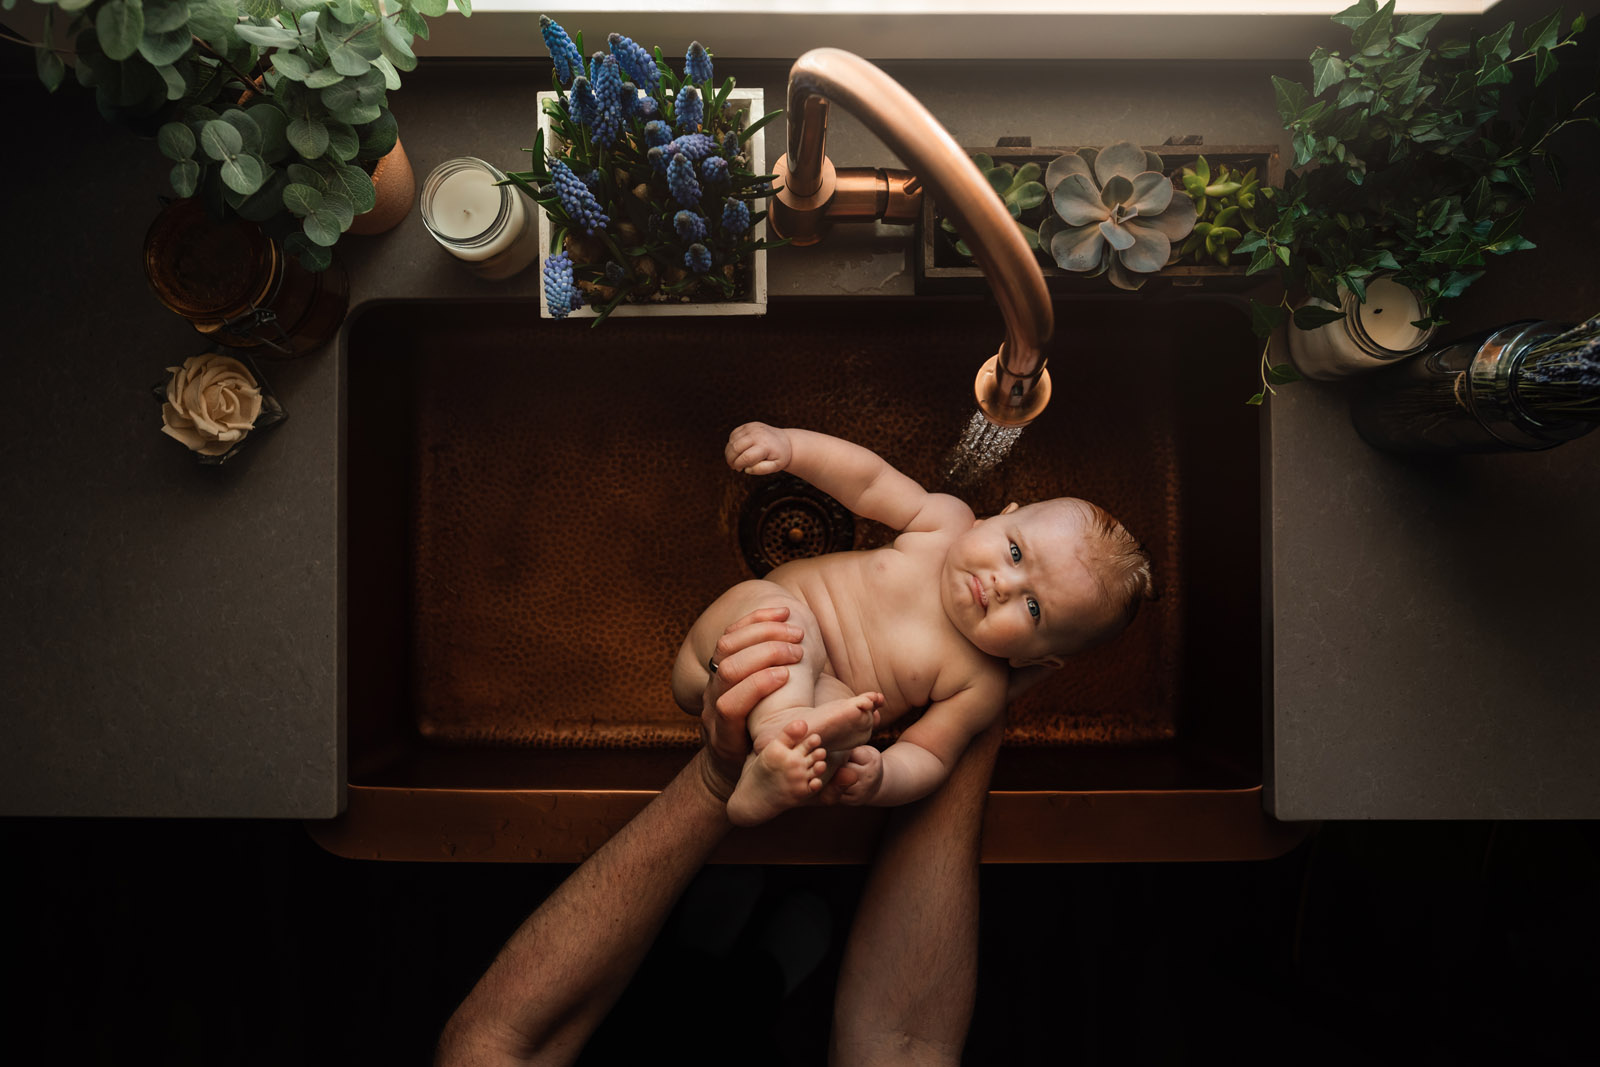 baby being bathed in copper sink with plants surrounding meg loeks